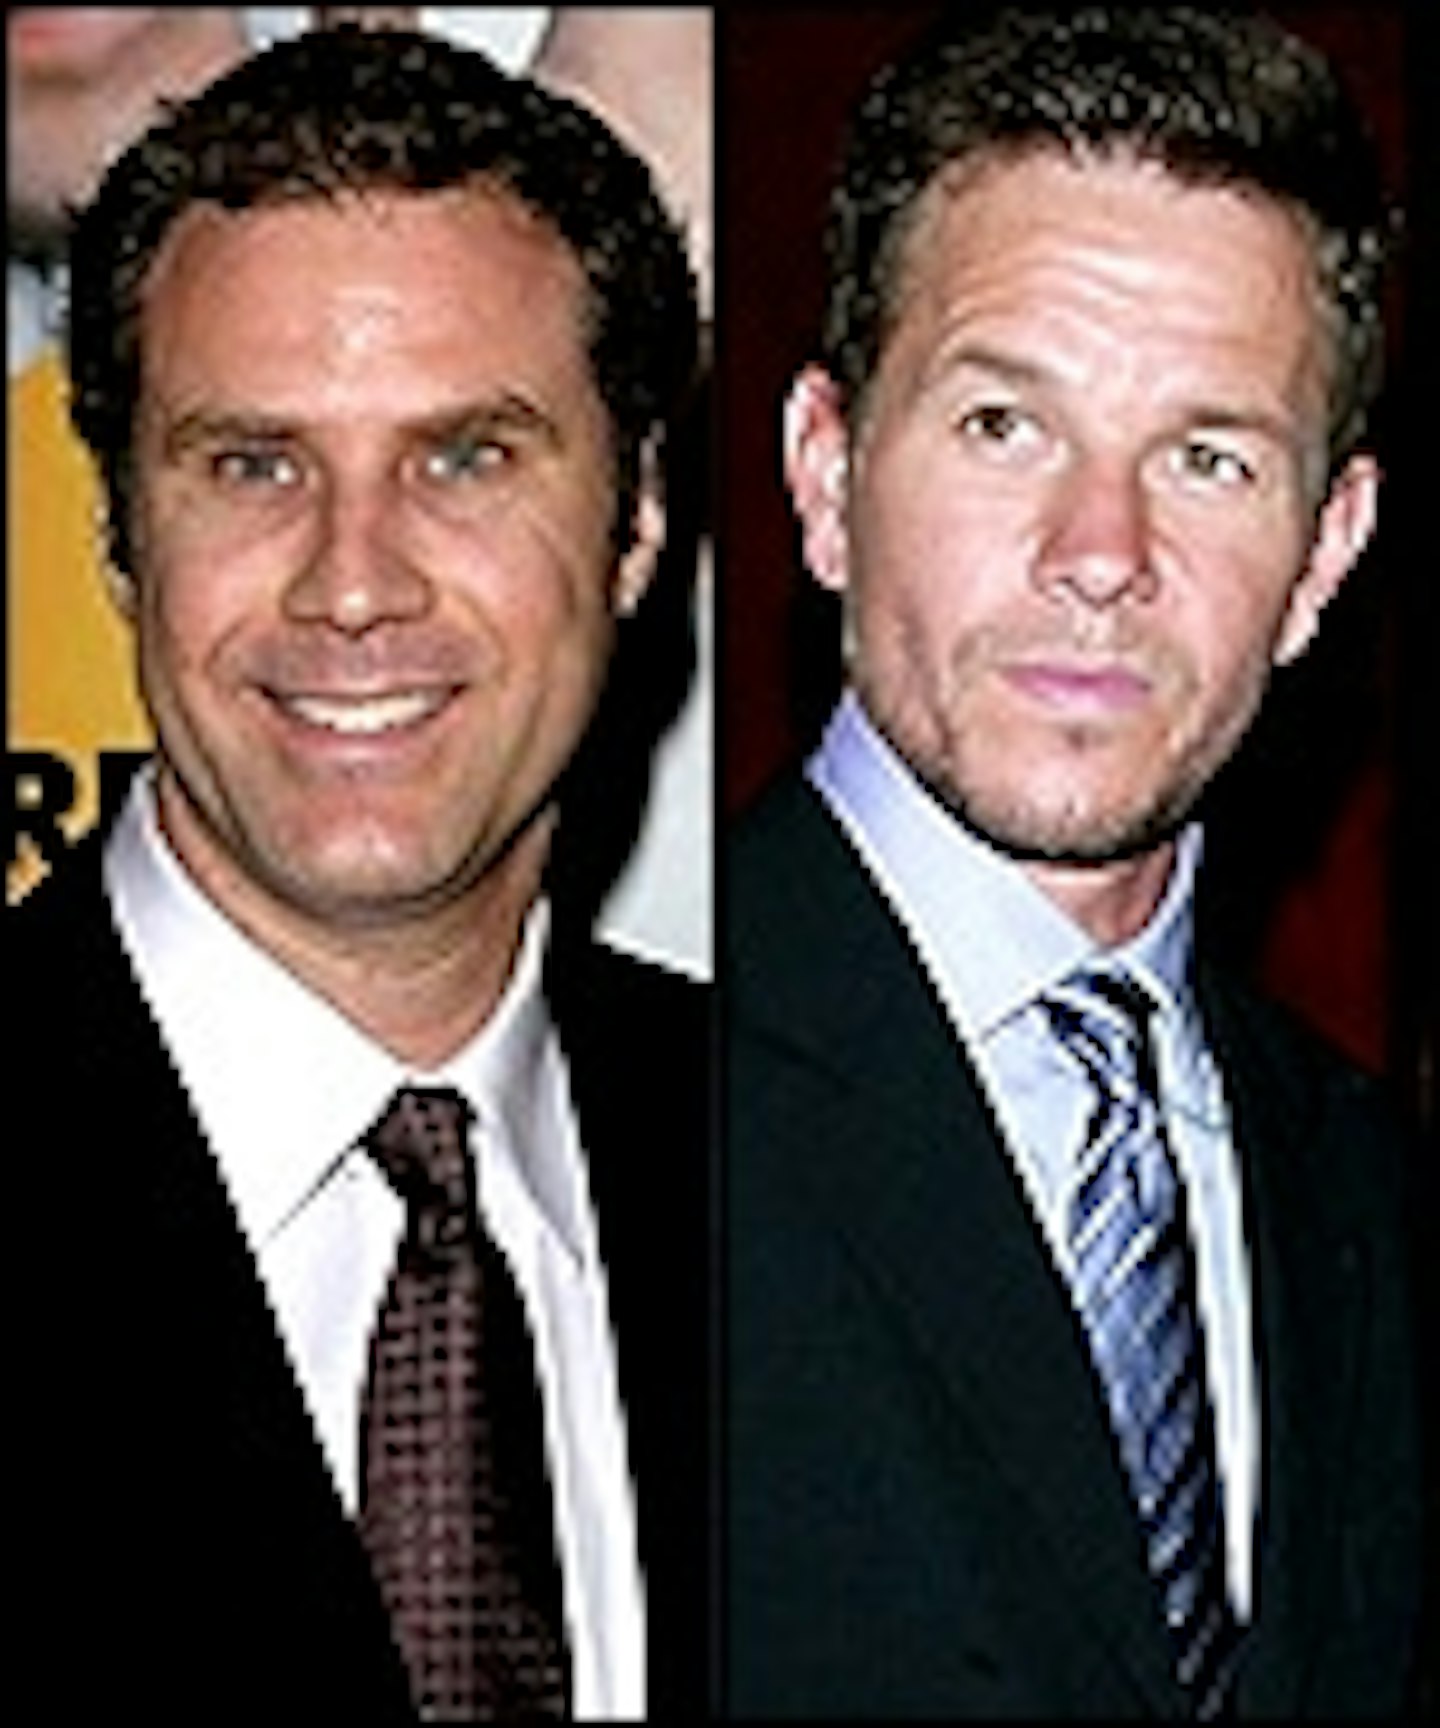 Ferrell and Wahlberg Are The B Team!